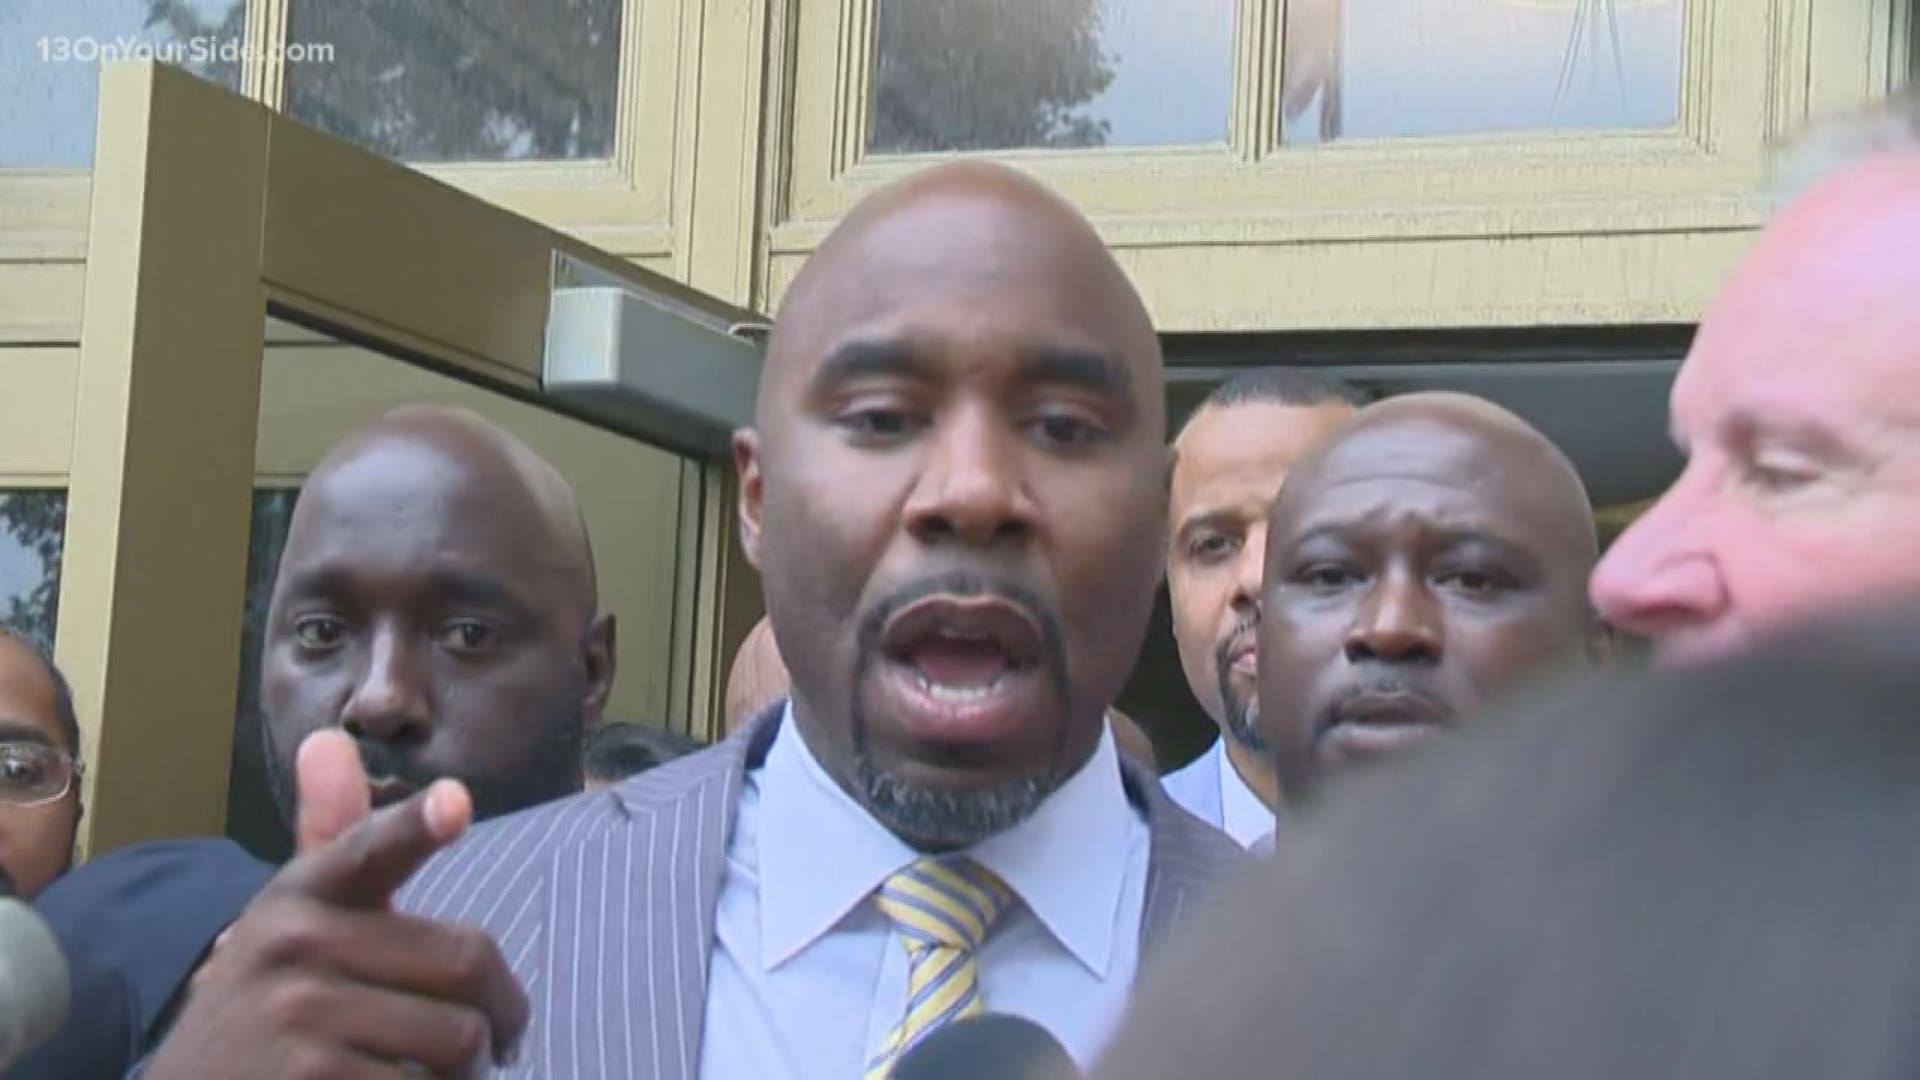 Mateen Cleaves found not guilty of sexual assault